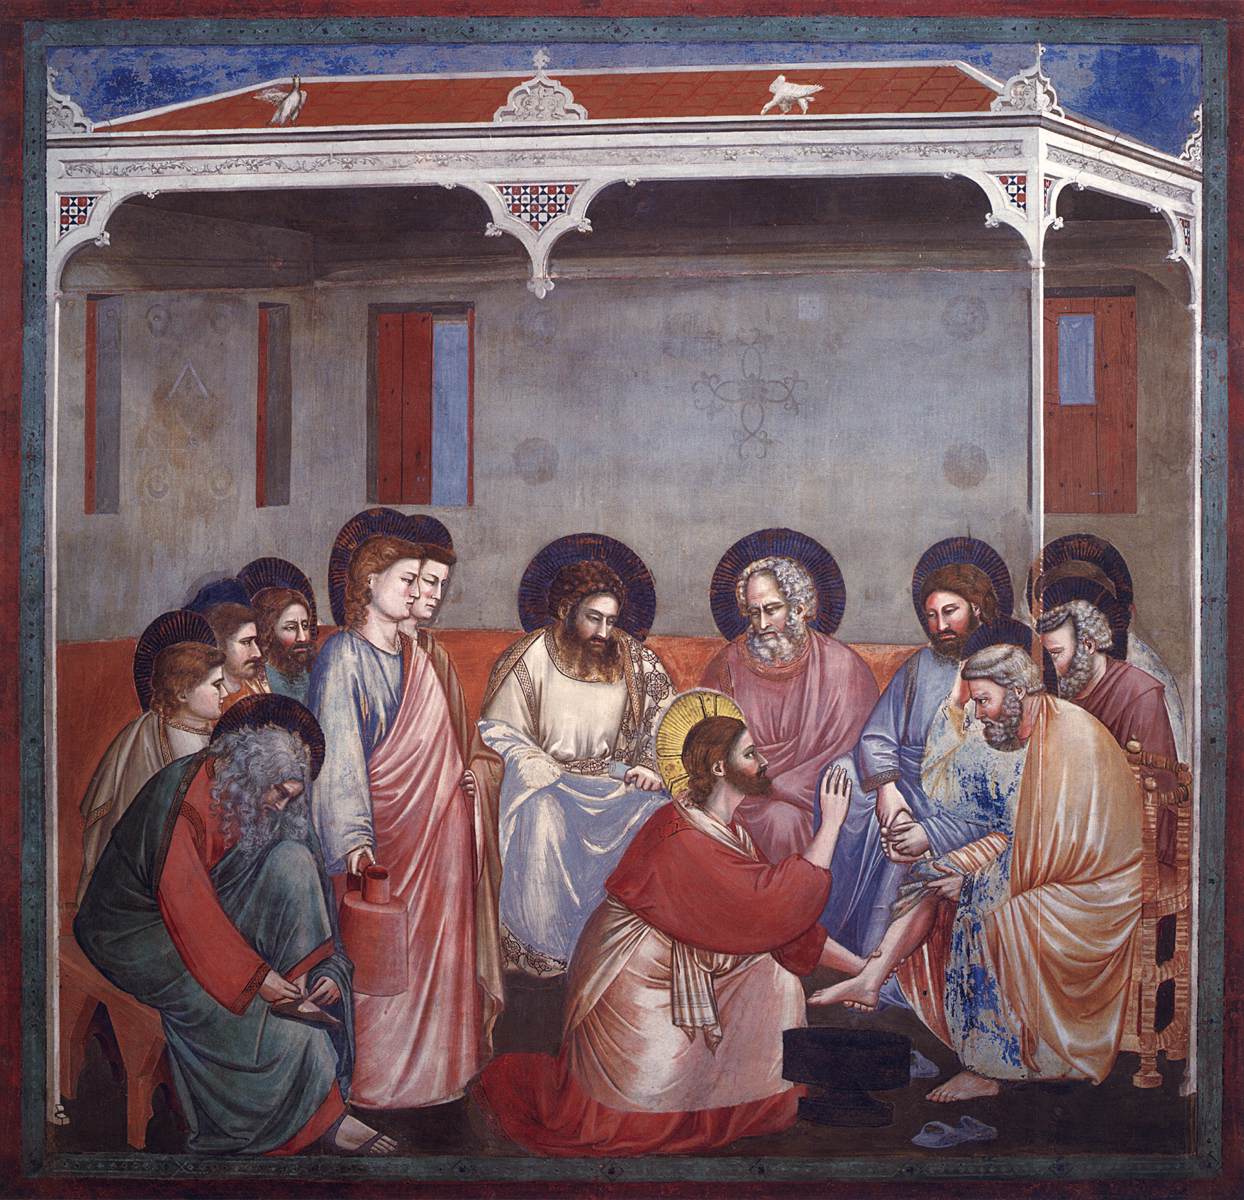 No 30 Scenes from the Life of Christ: 14 Washing of Feet